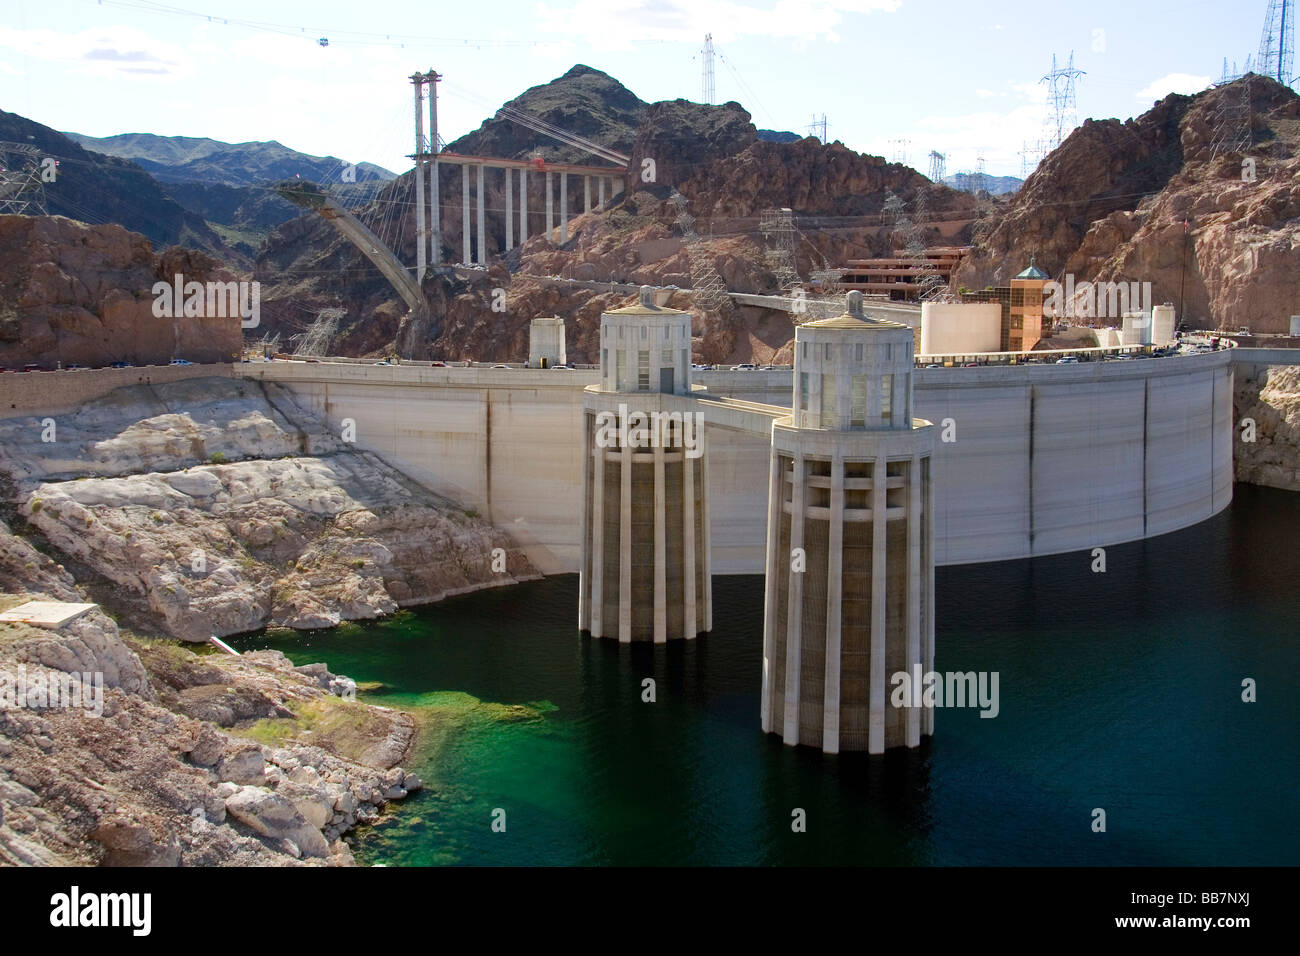 Intake towers of the Hoover Dam on the border between the states of Arizona and Nevada USA Stock Photo